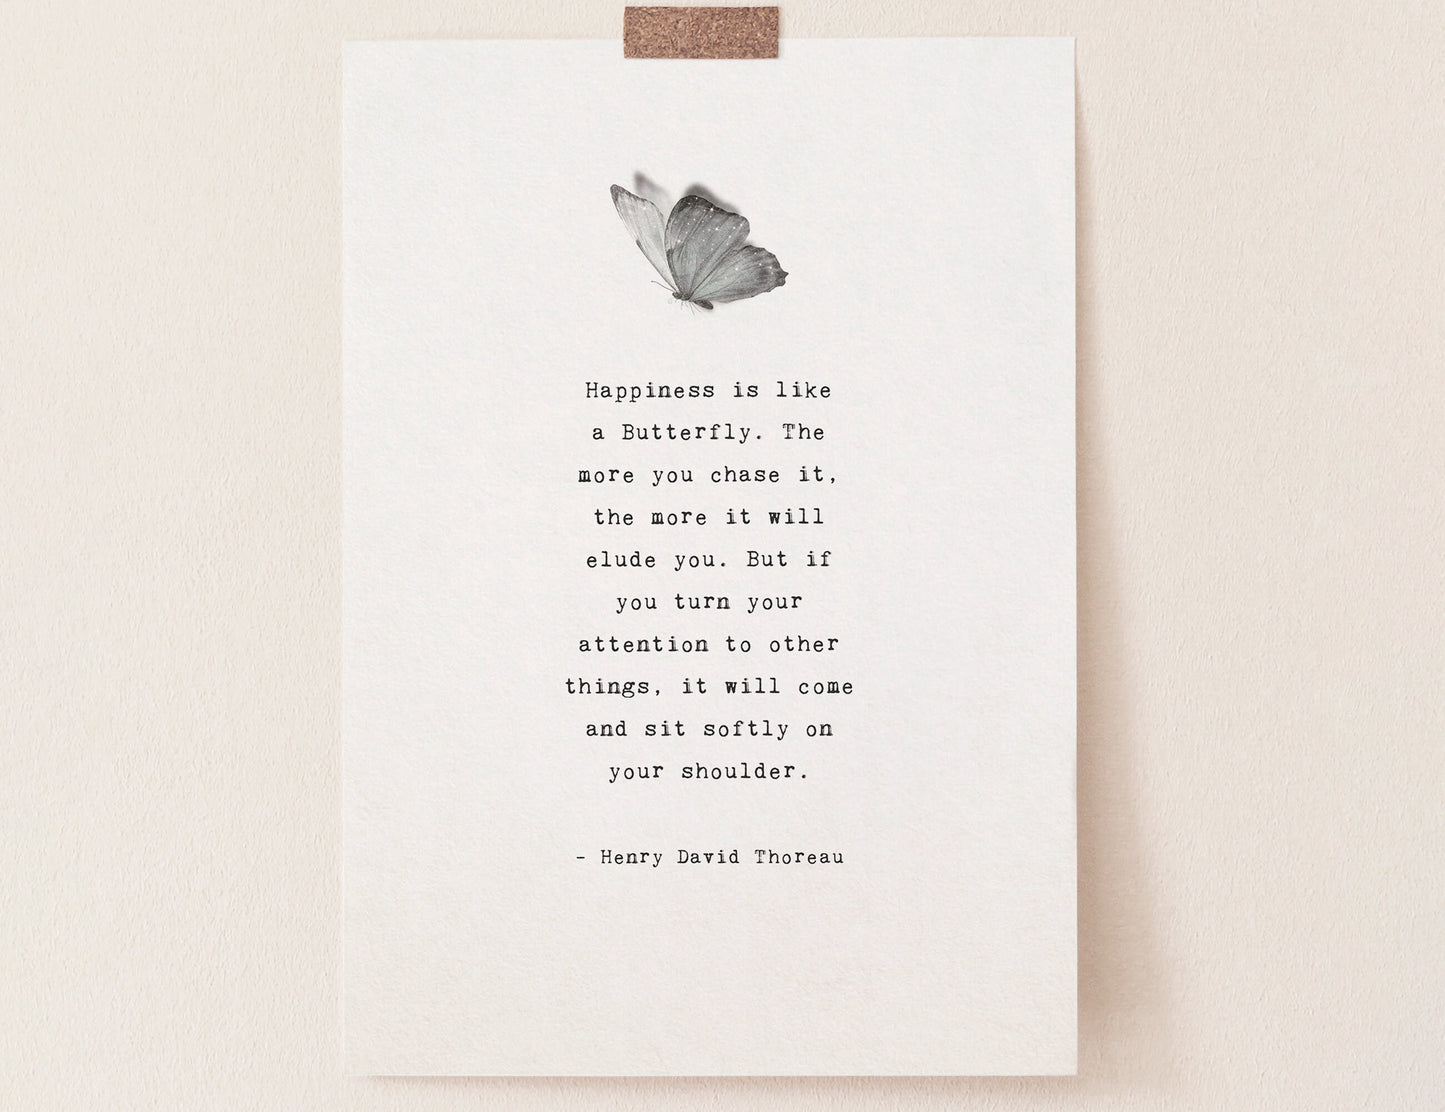 Henry David Thoreau quote "happiness is like a butterfly..."